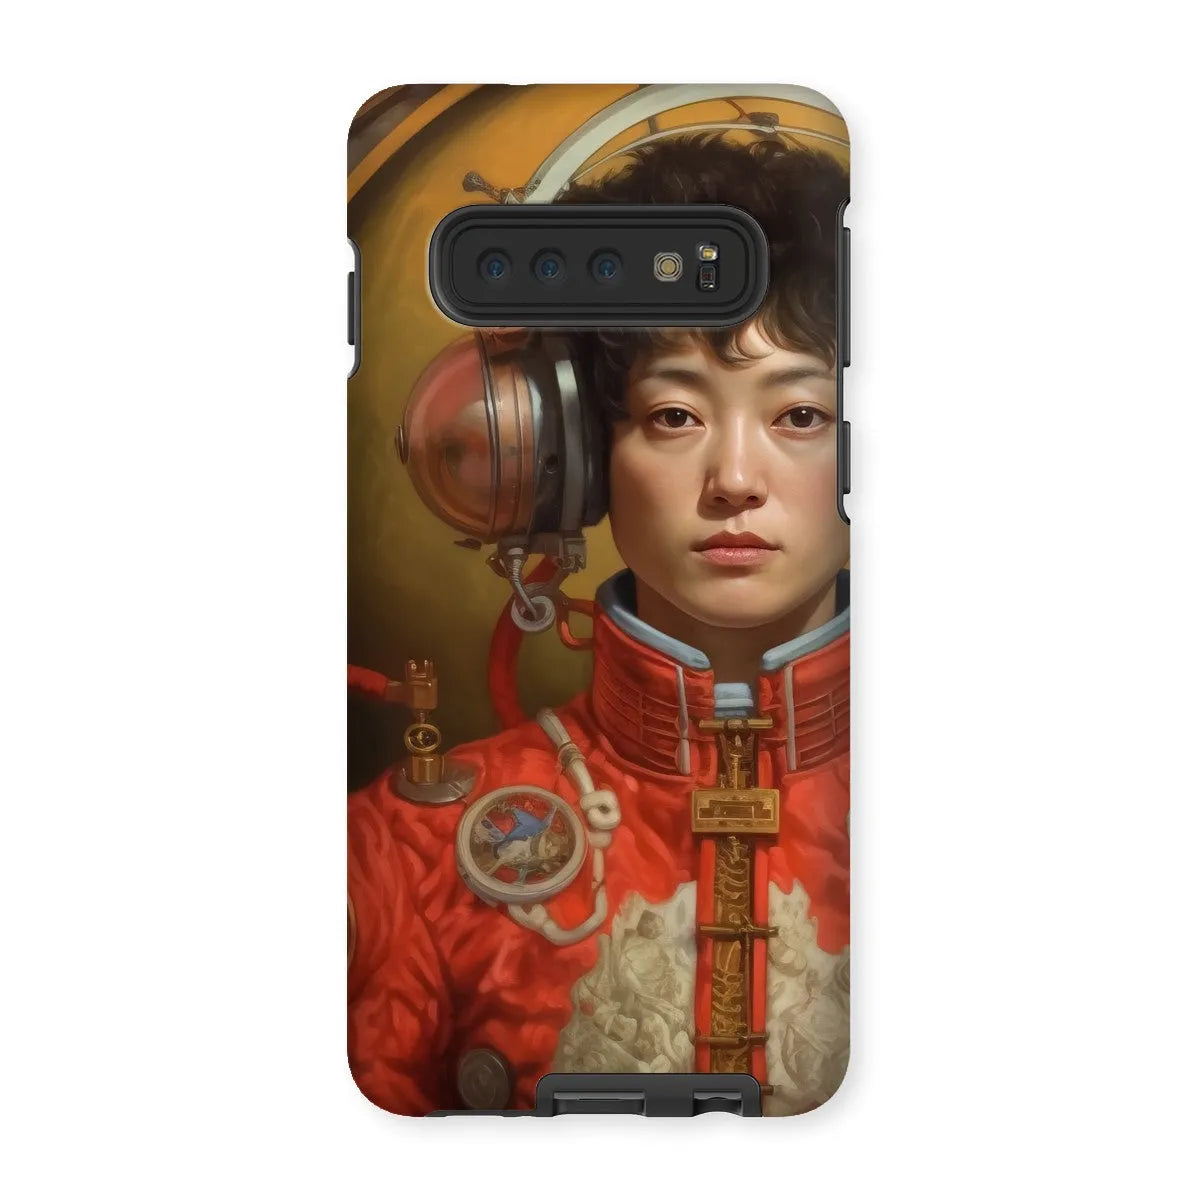 Mùchén - Gay Chinese Astronaut Aesthetic Phone Case - Samsung Galaxy S10 / Matte - Mobile Phone Cases - Aesthetic Art